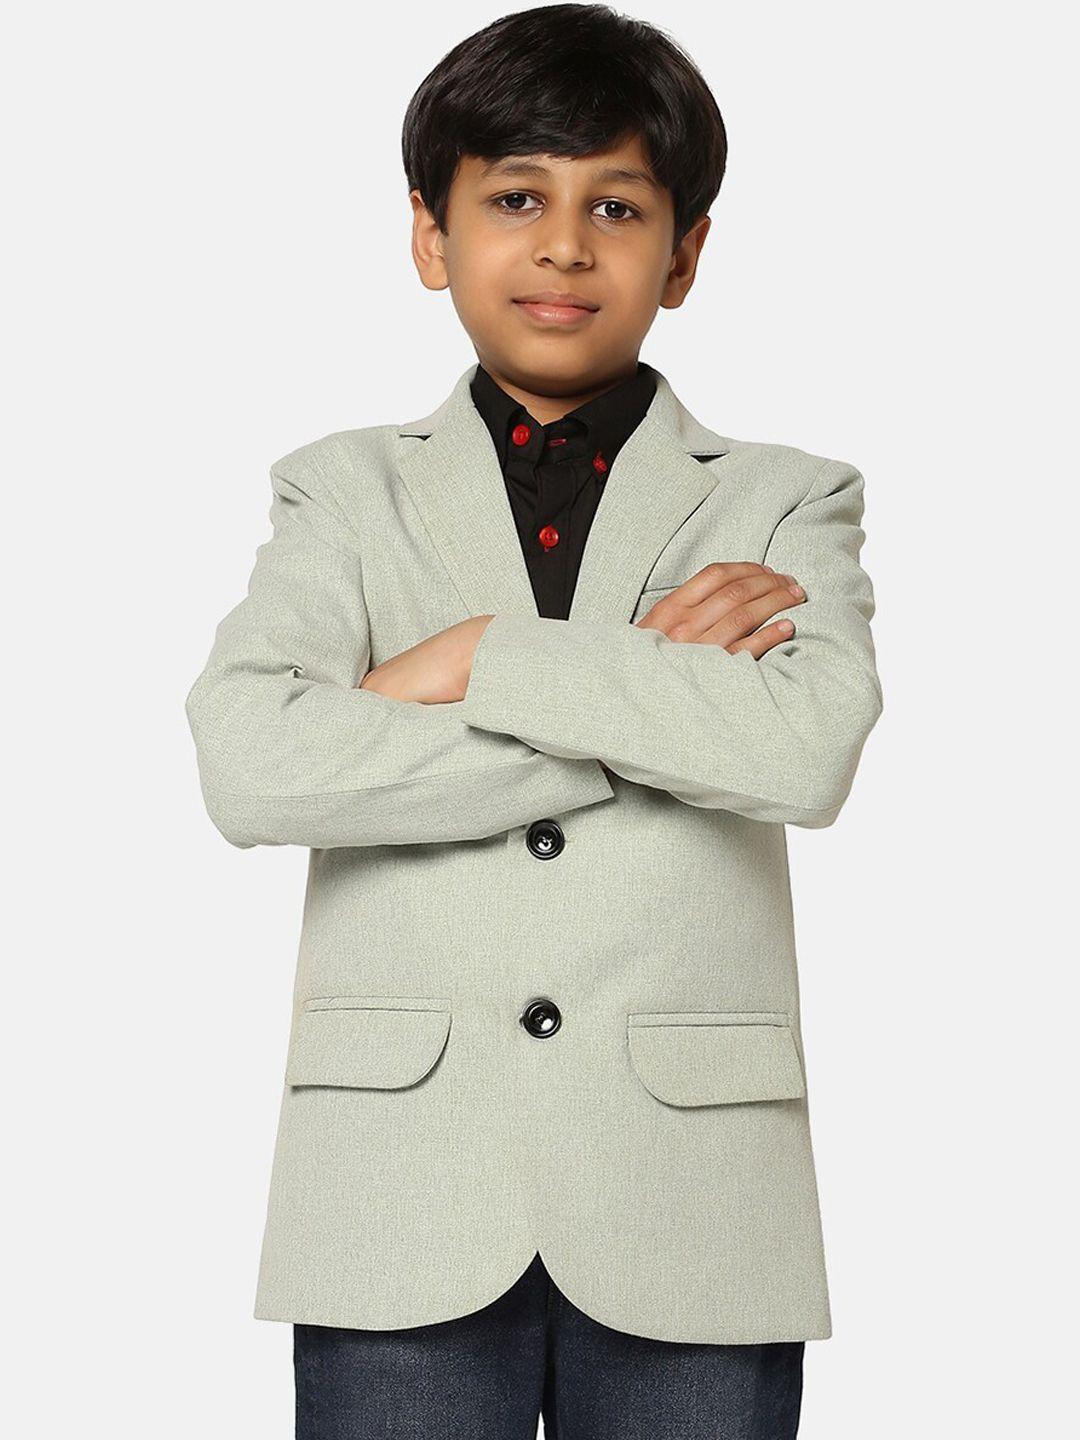 tahvo boys single-breasted notched lapel slim fit blazers